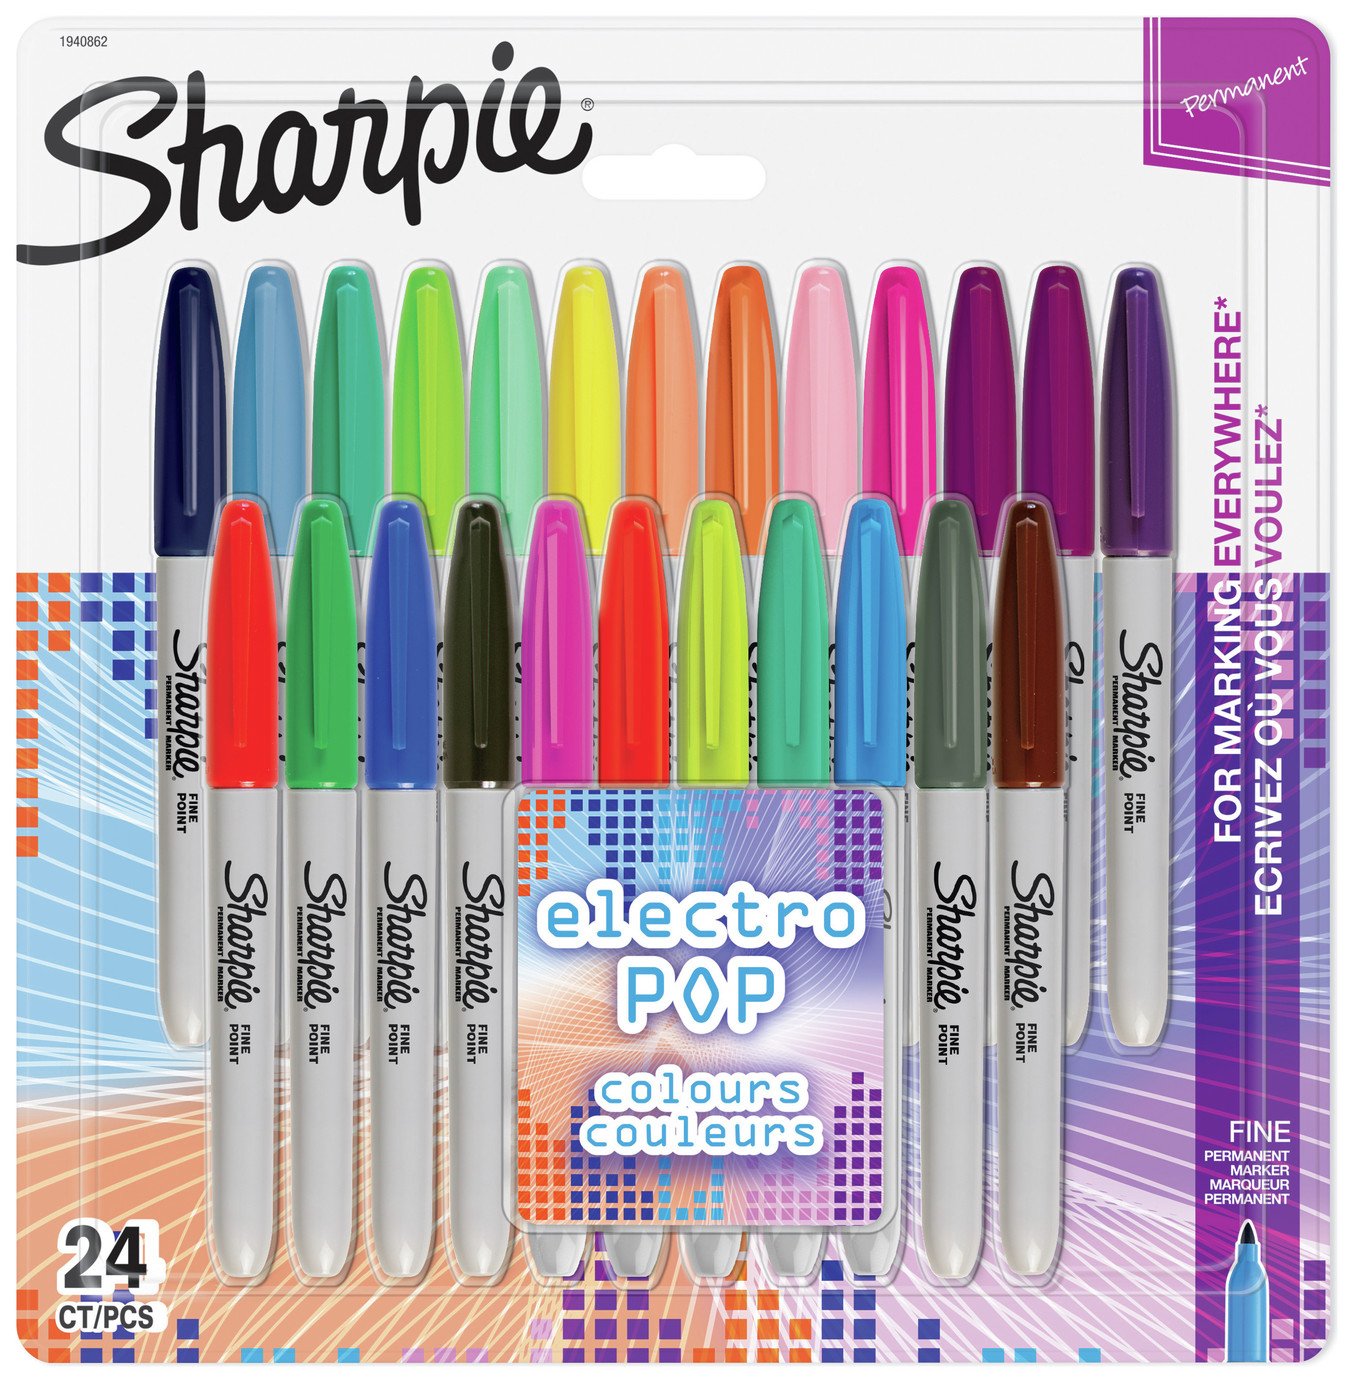 Sharpie 24 Pack of Electro Pop Permanent Markers